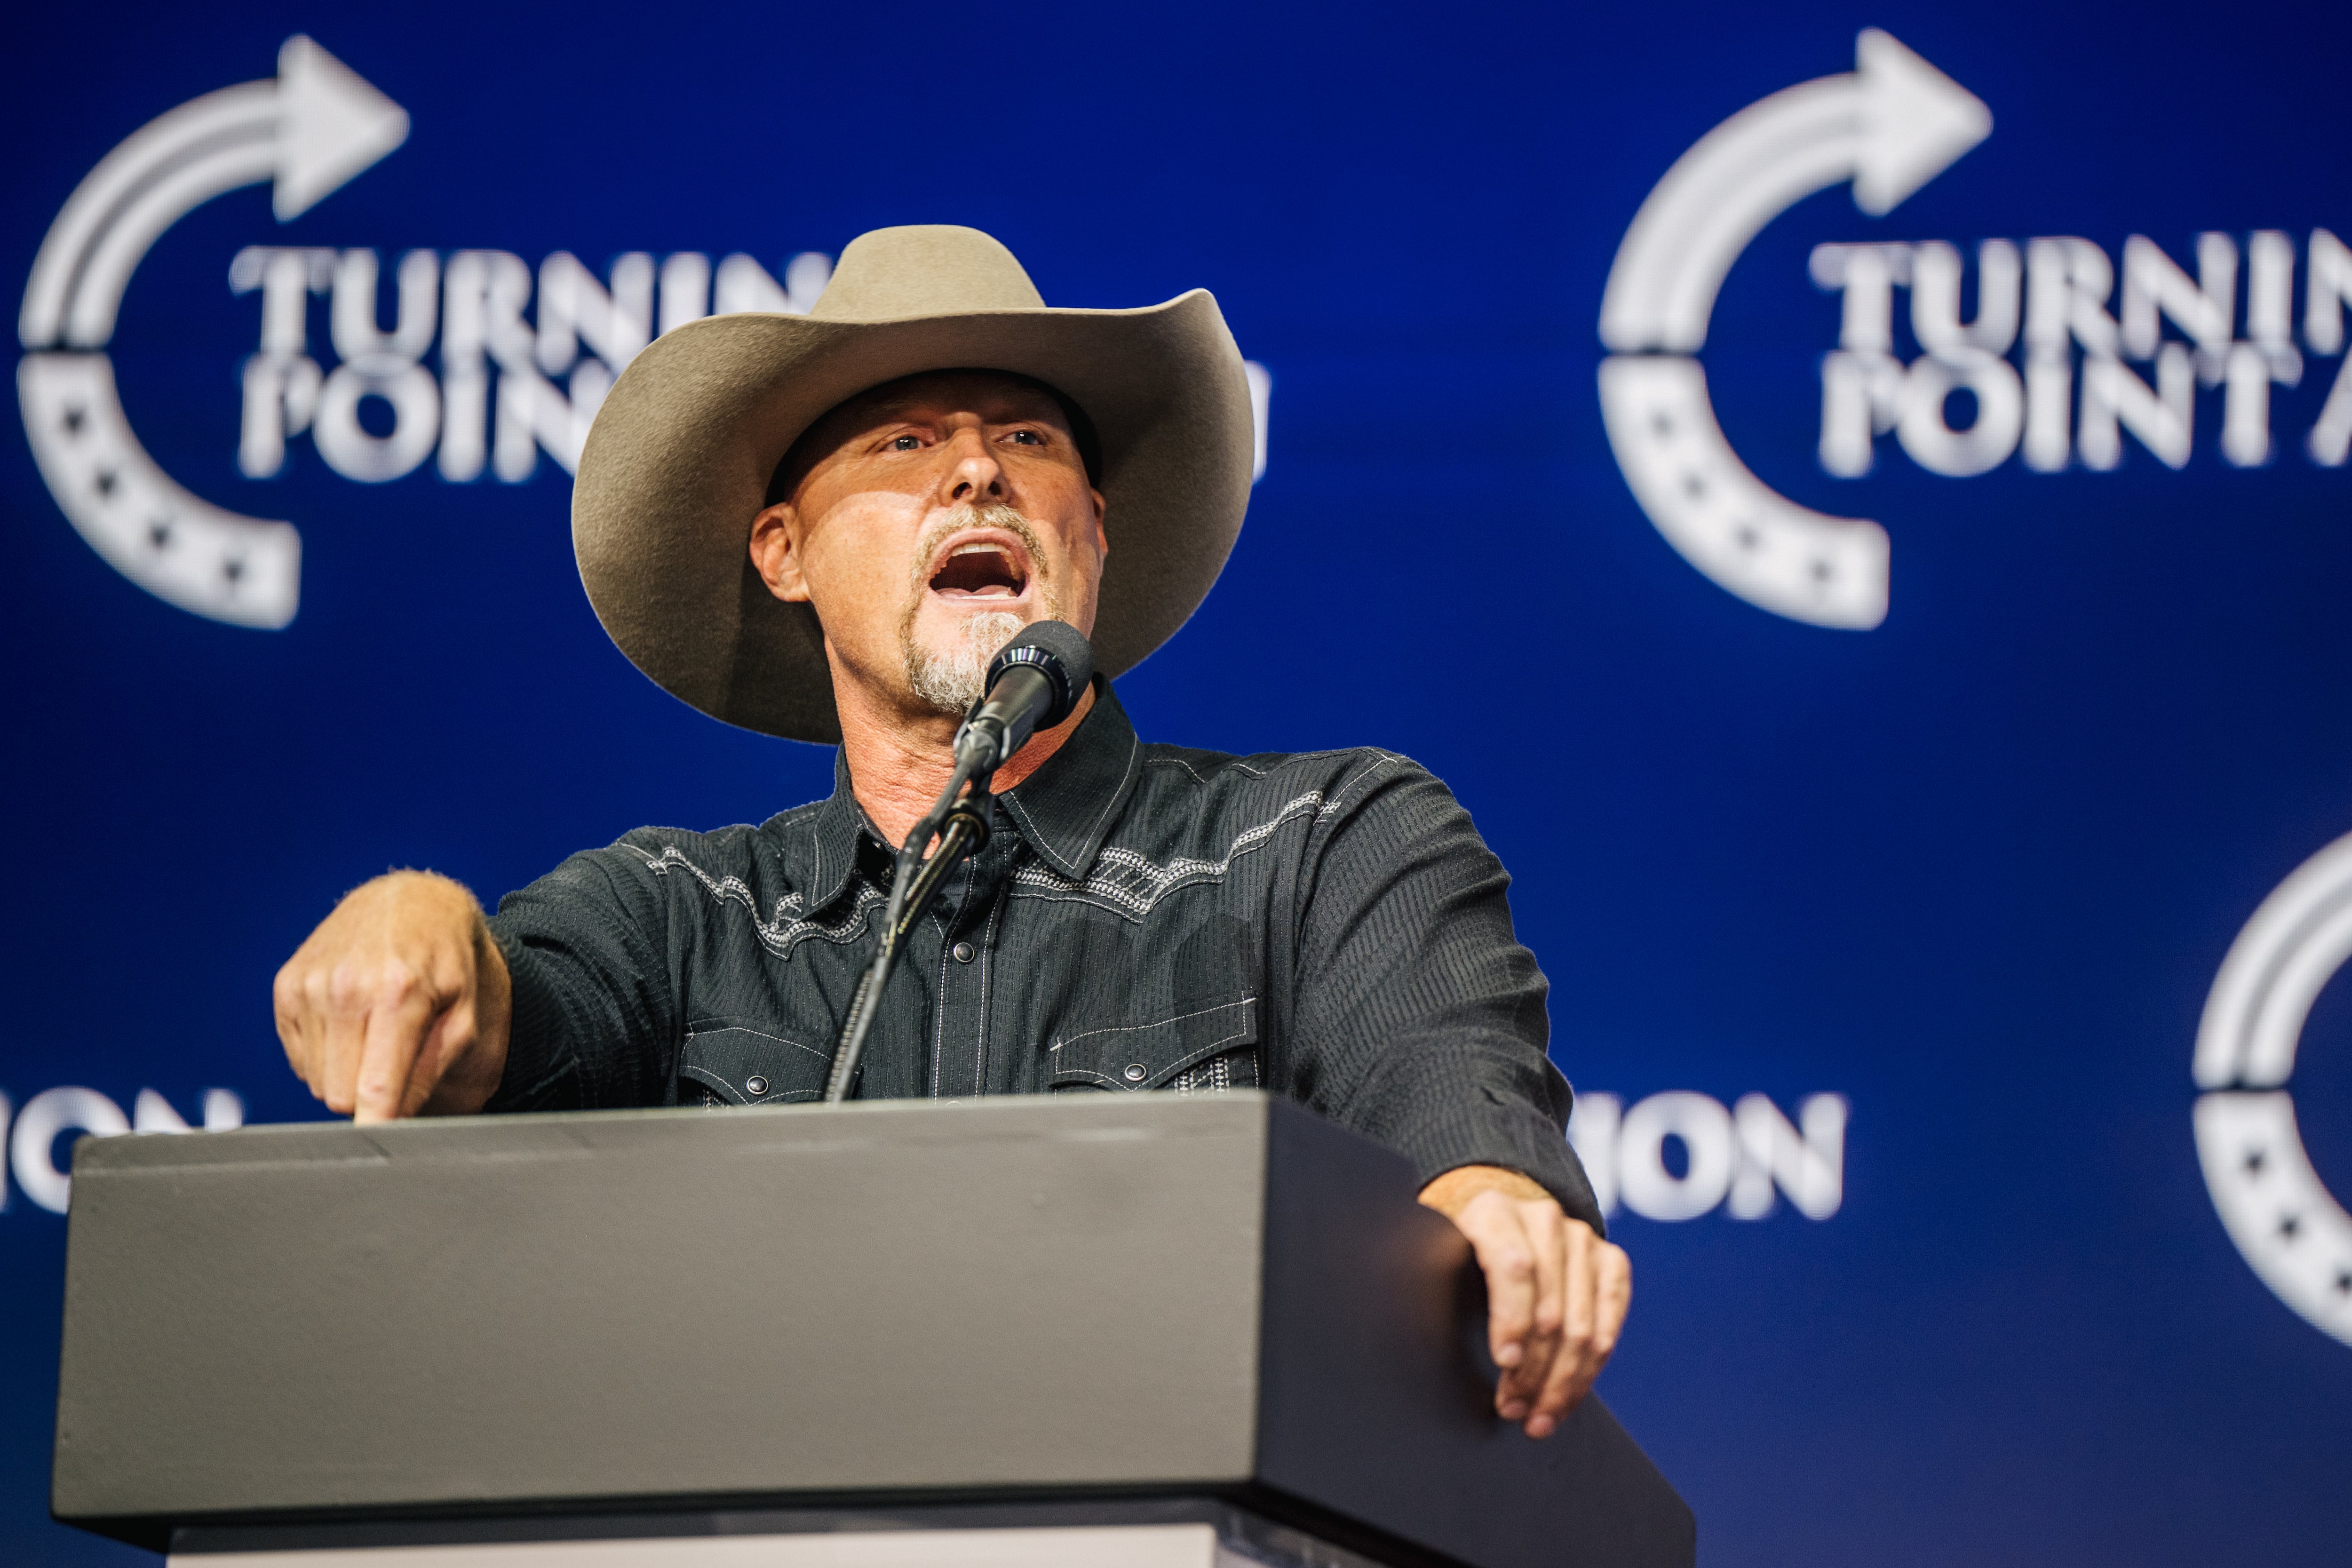 A bearded man in a dark western-style shirt and cowboy hat gestures at a podium against a dark blue backdrop with “Turning Point” written on it.&nbsp;